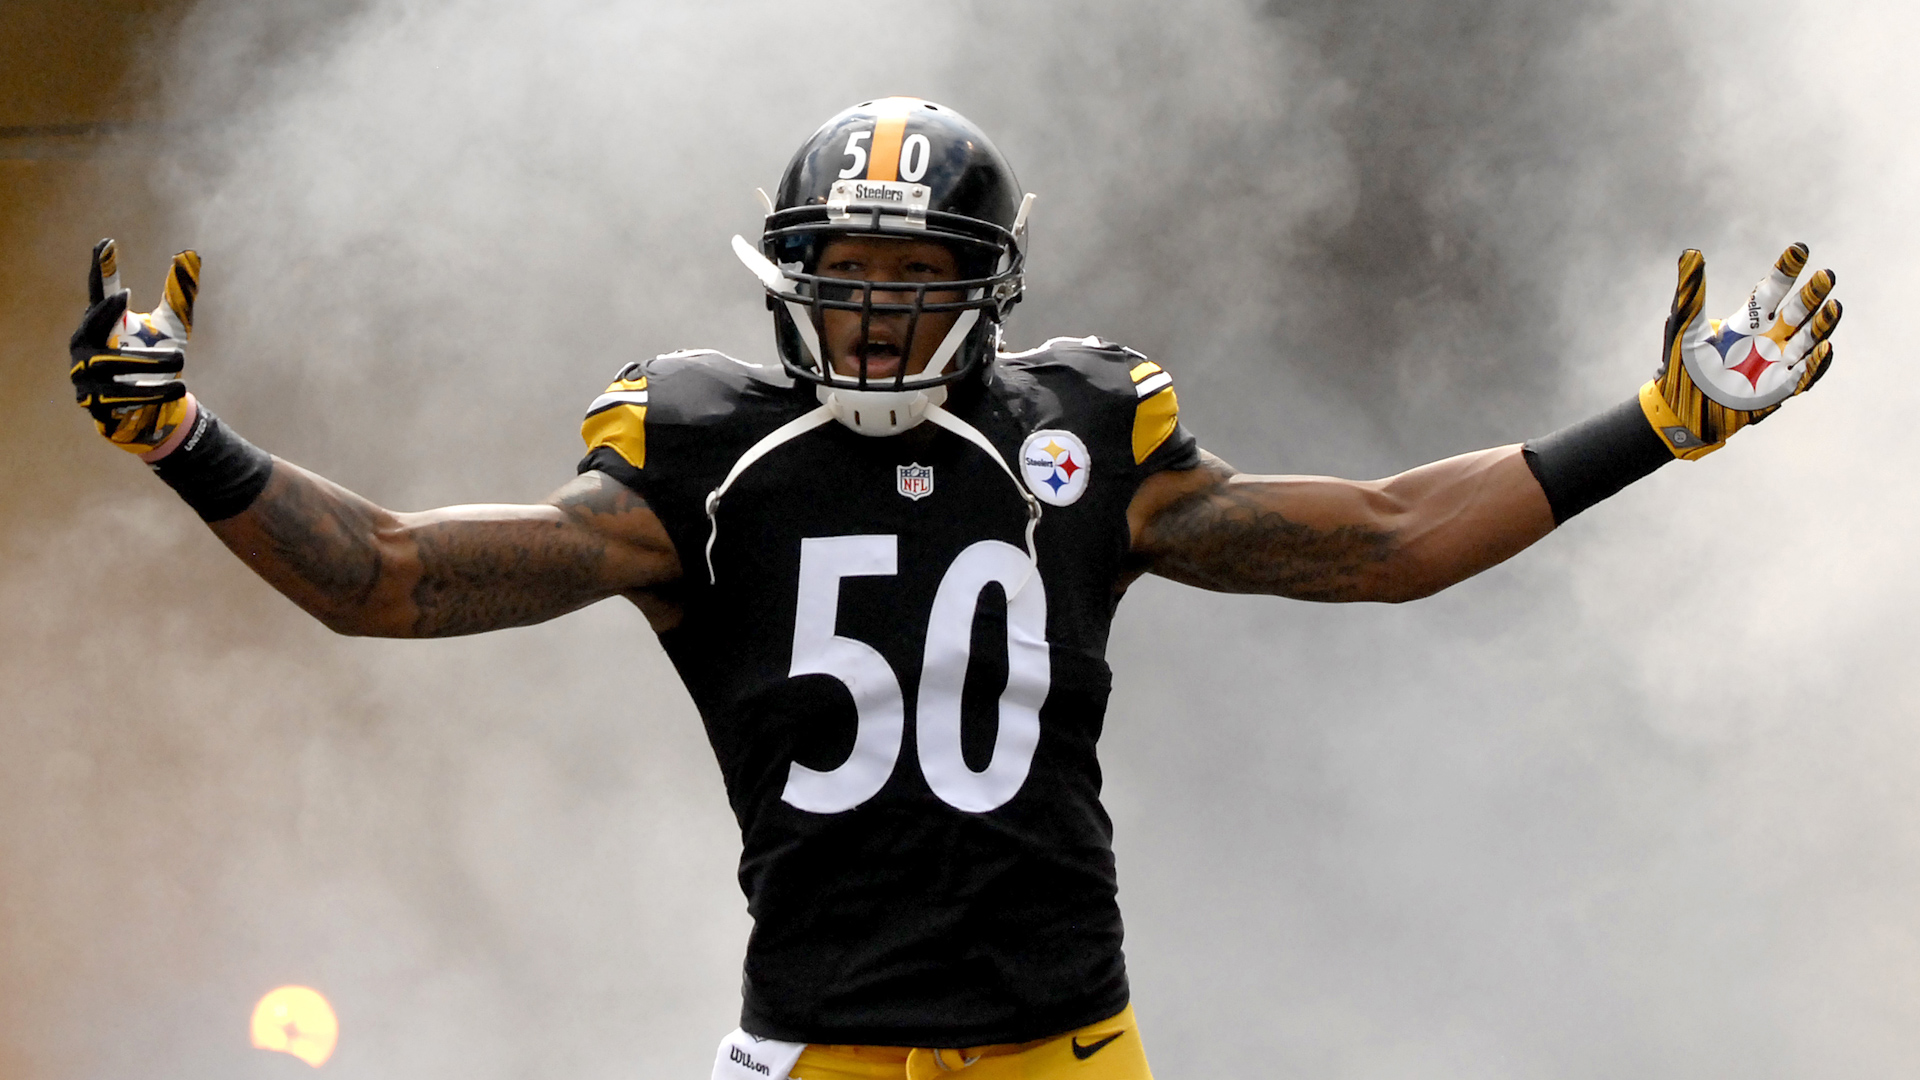 Ryan Shazier: The start of a new Steelers tradition1920 x 1080